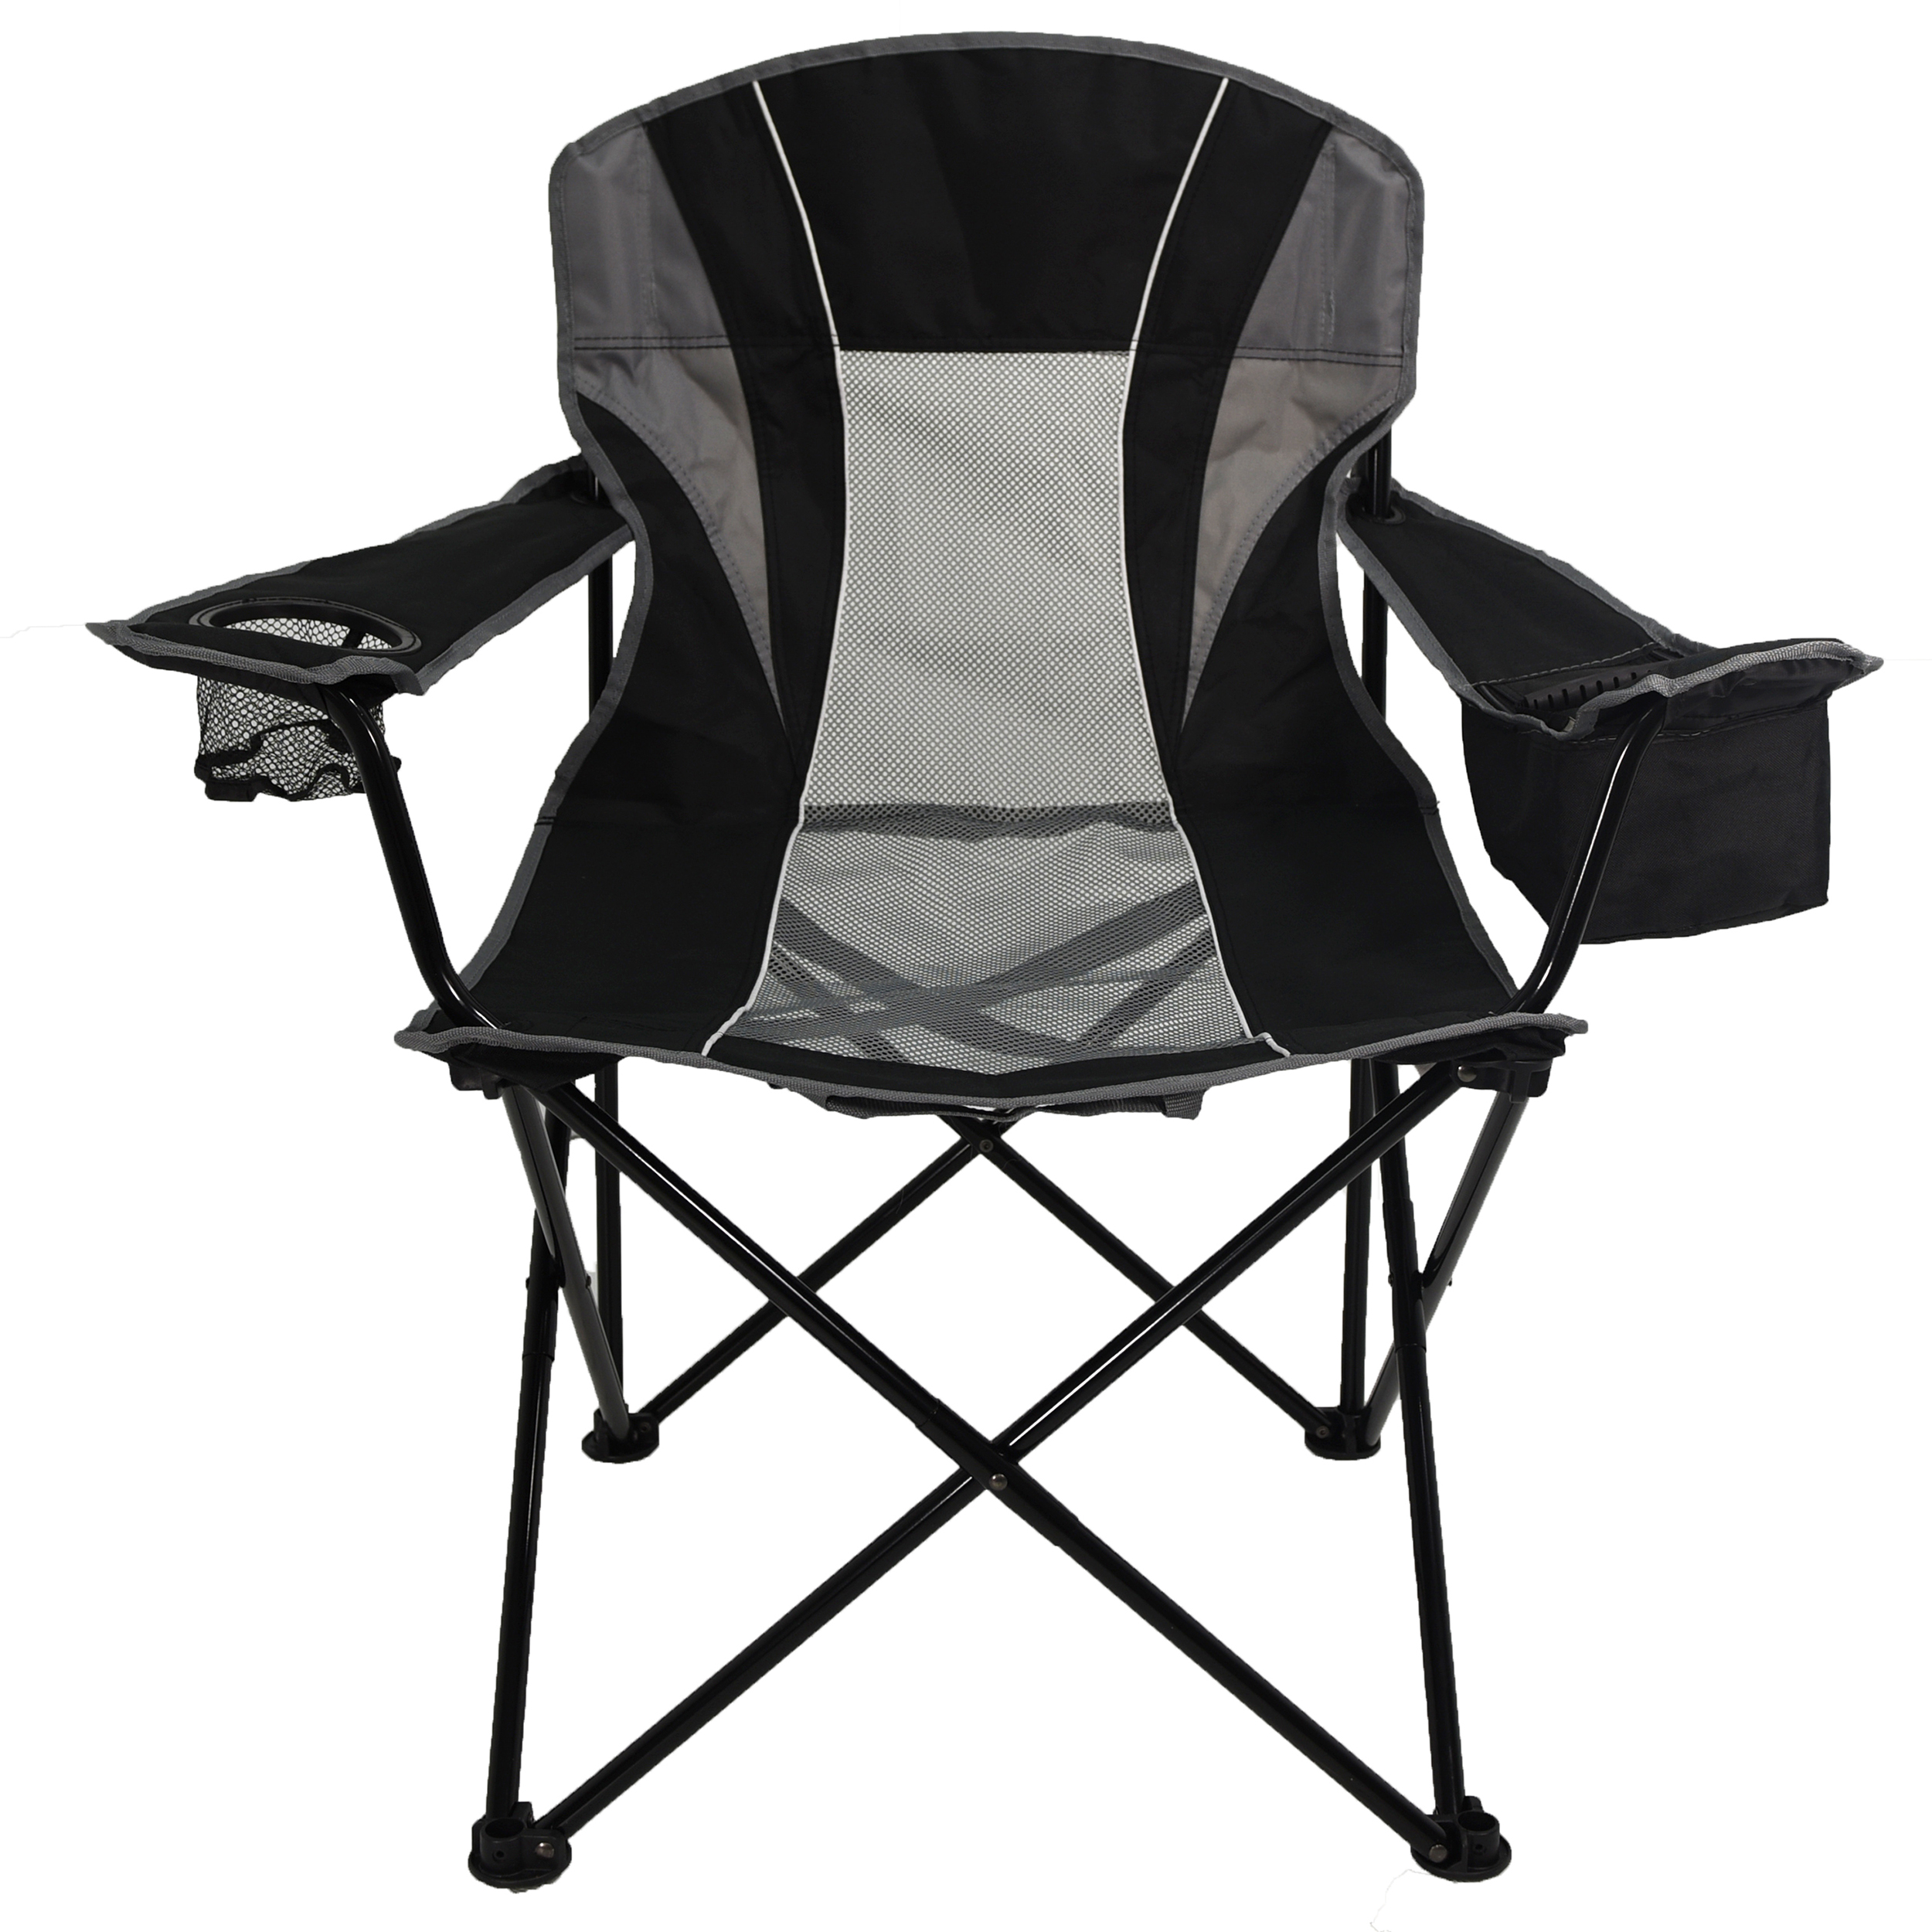 Ozark Trail Camping Chair, Black and Gray - image 1 of 9